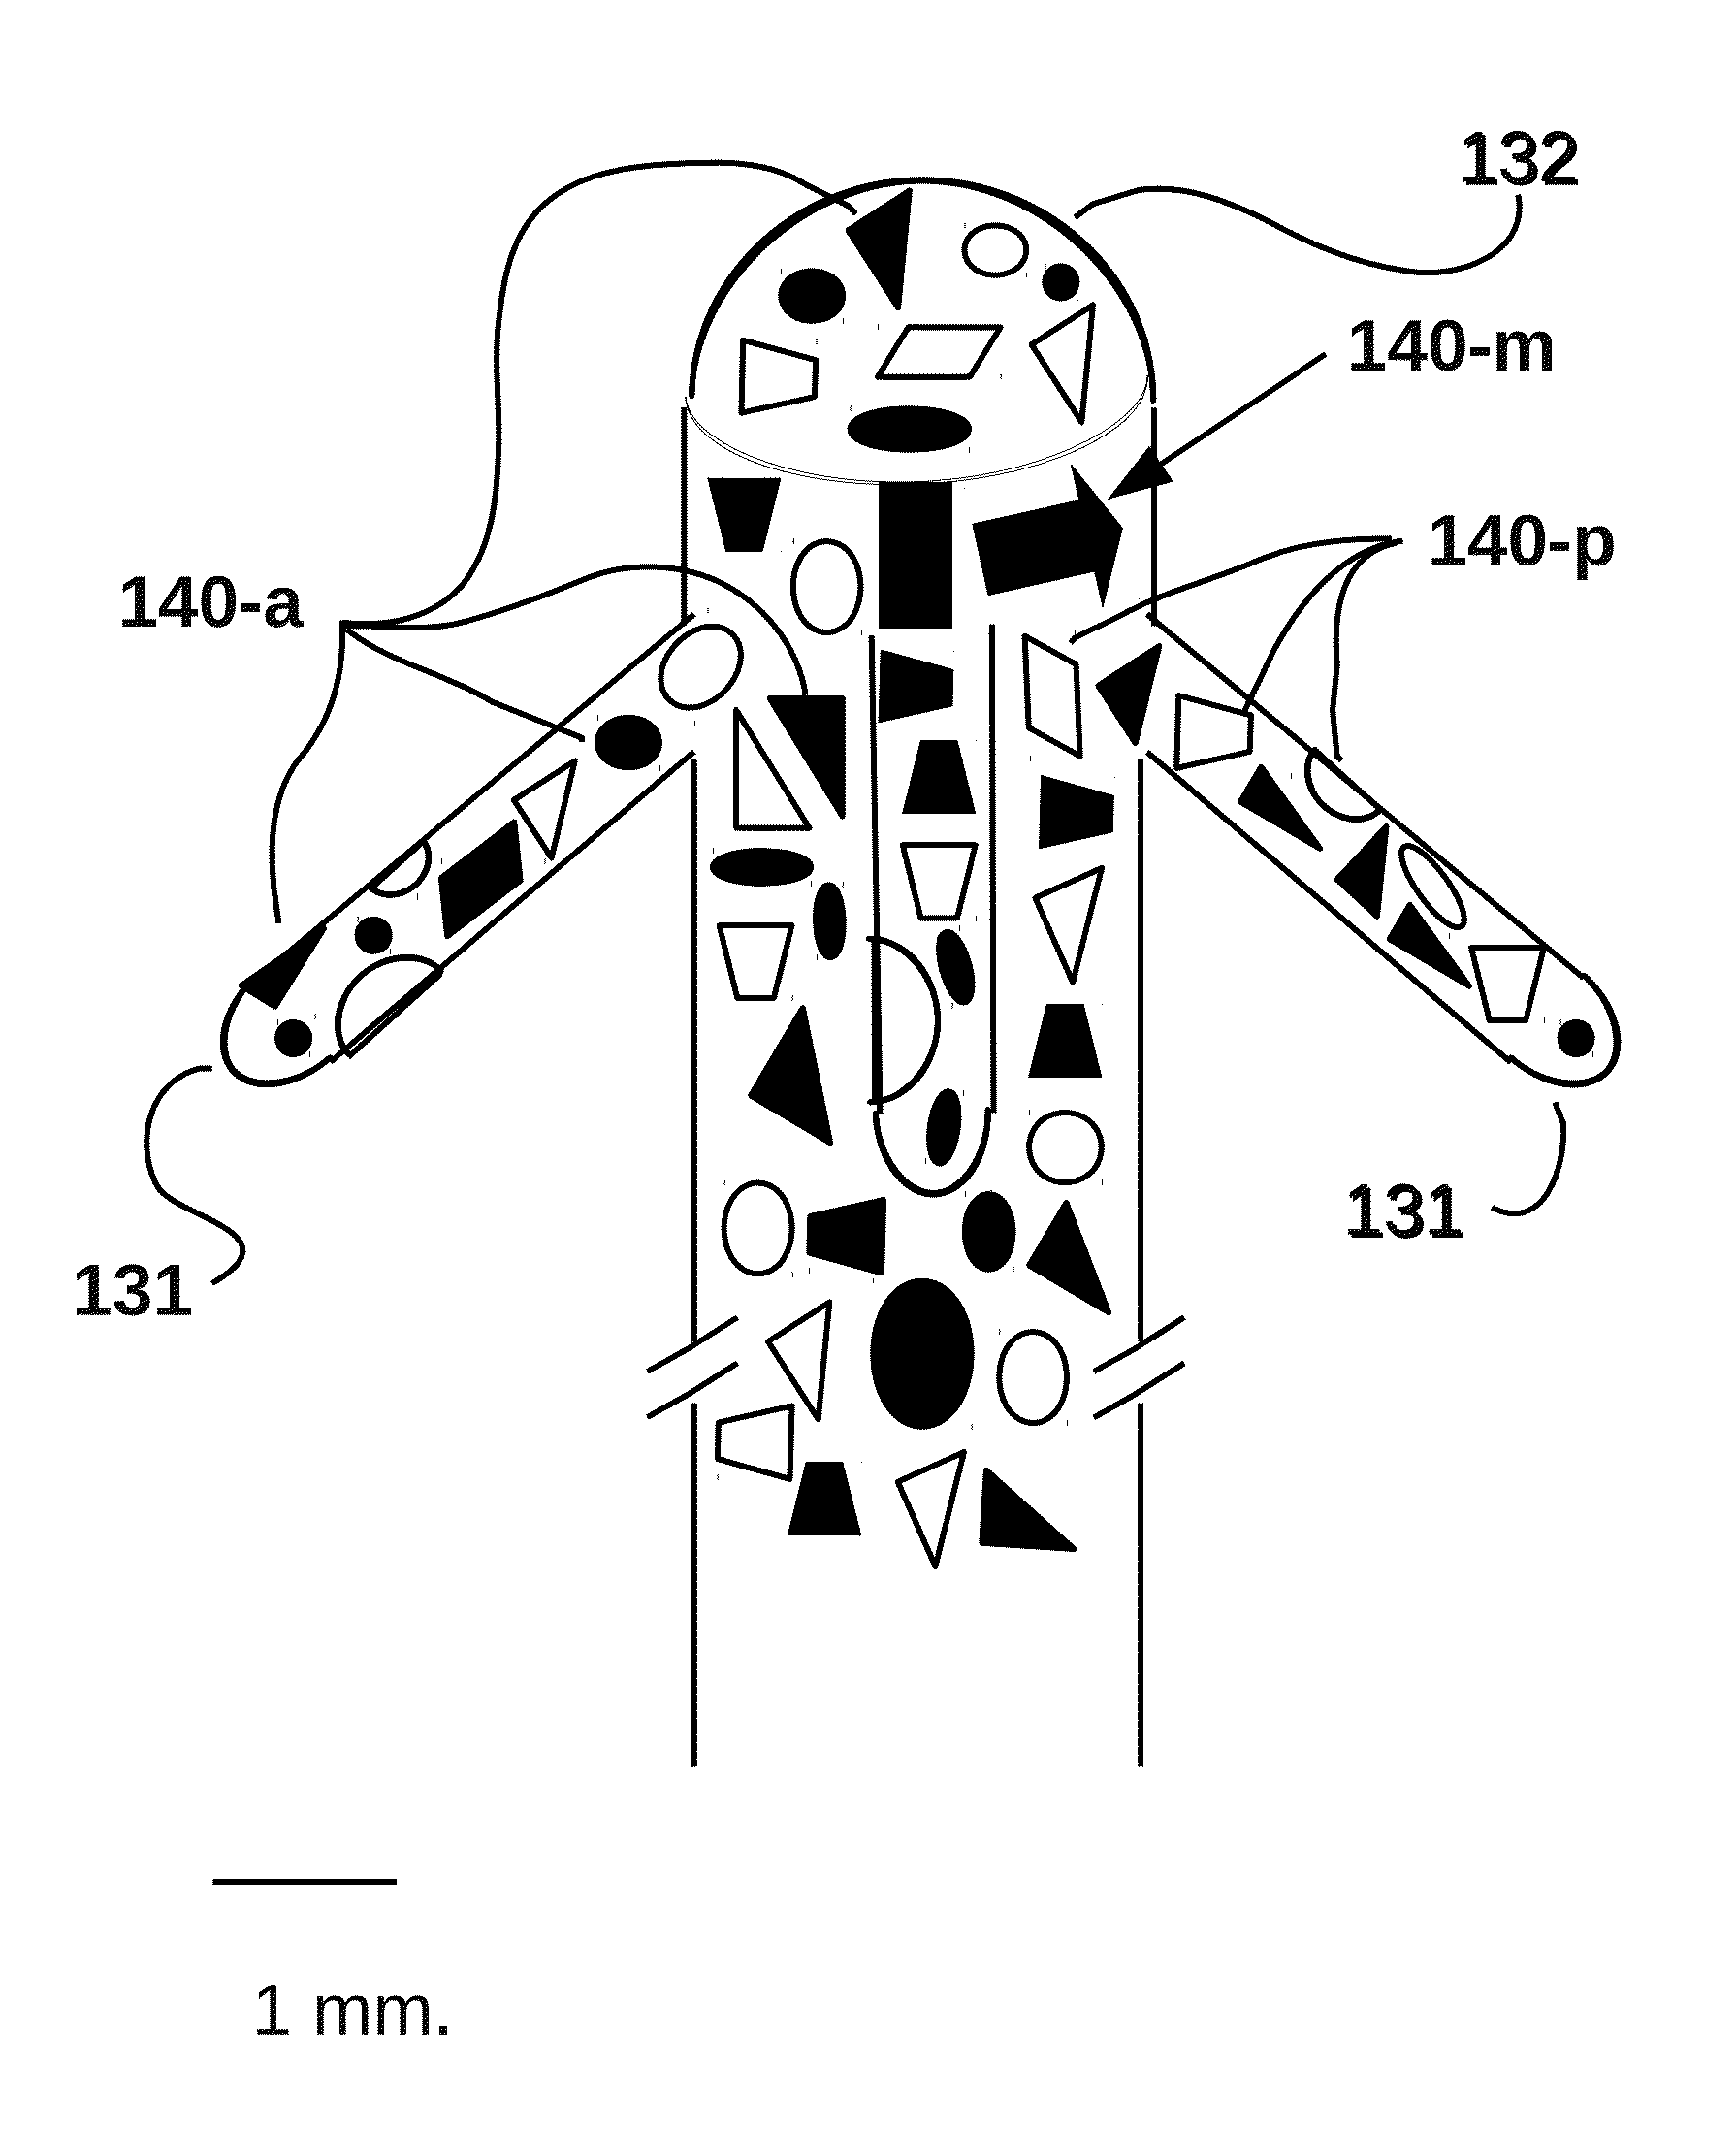 Animal and plant cell electric stimulator with randomized spatial distribution of electrodes for both current injection and for electric field shaping